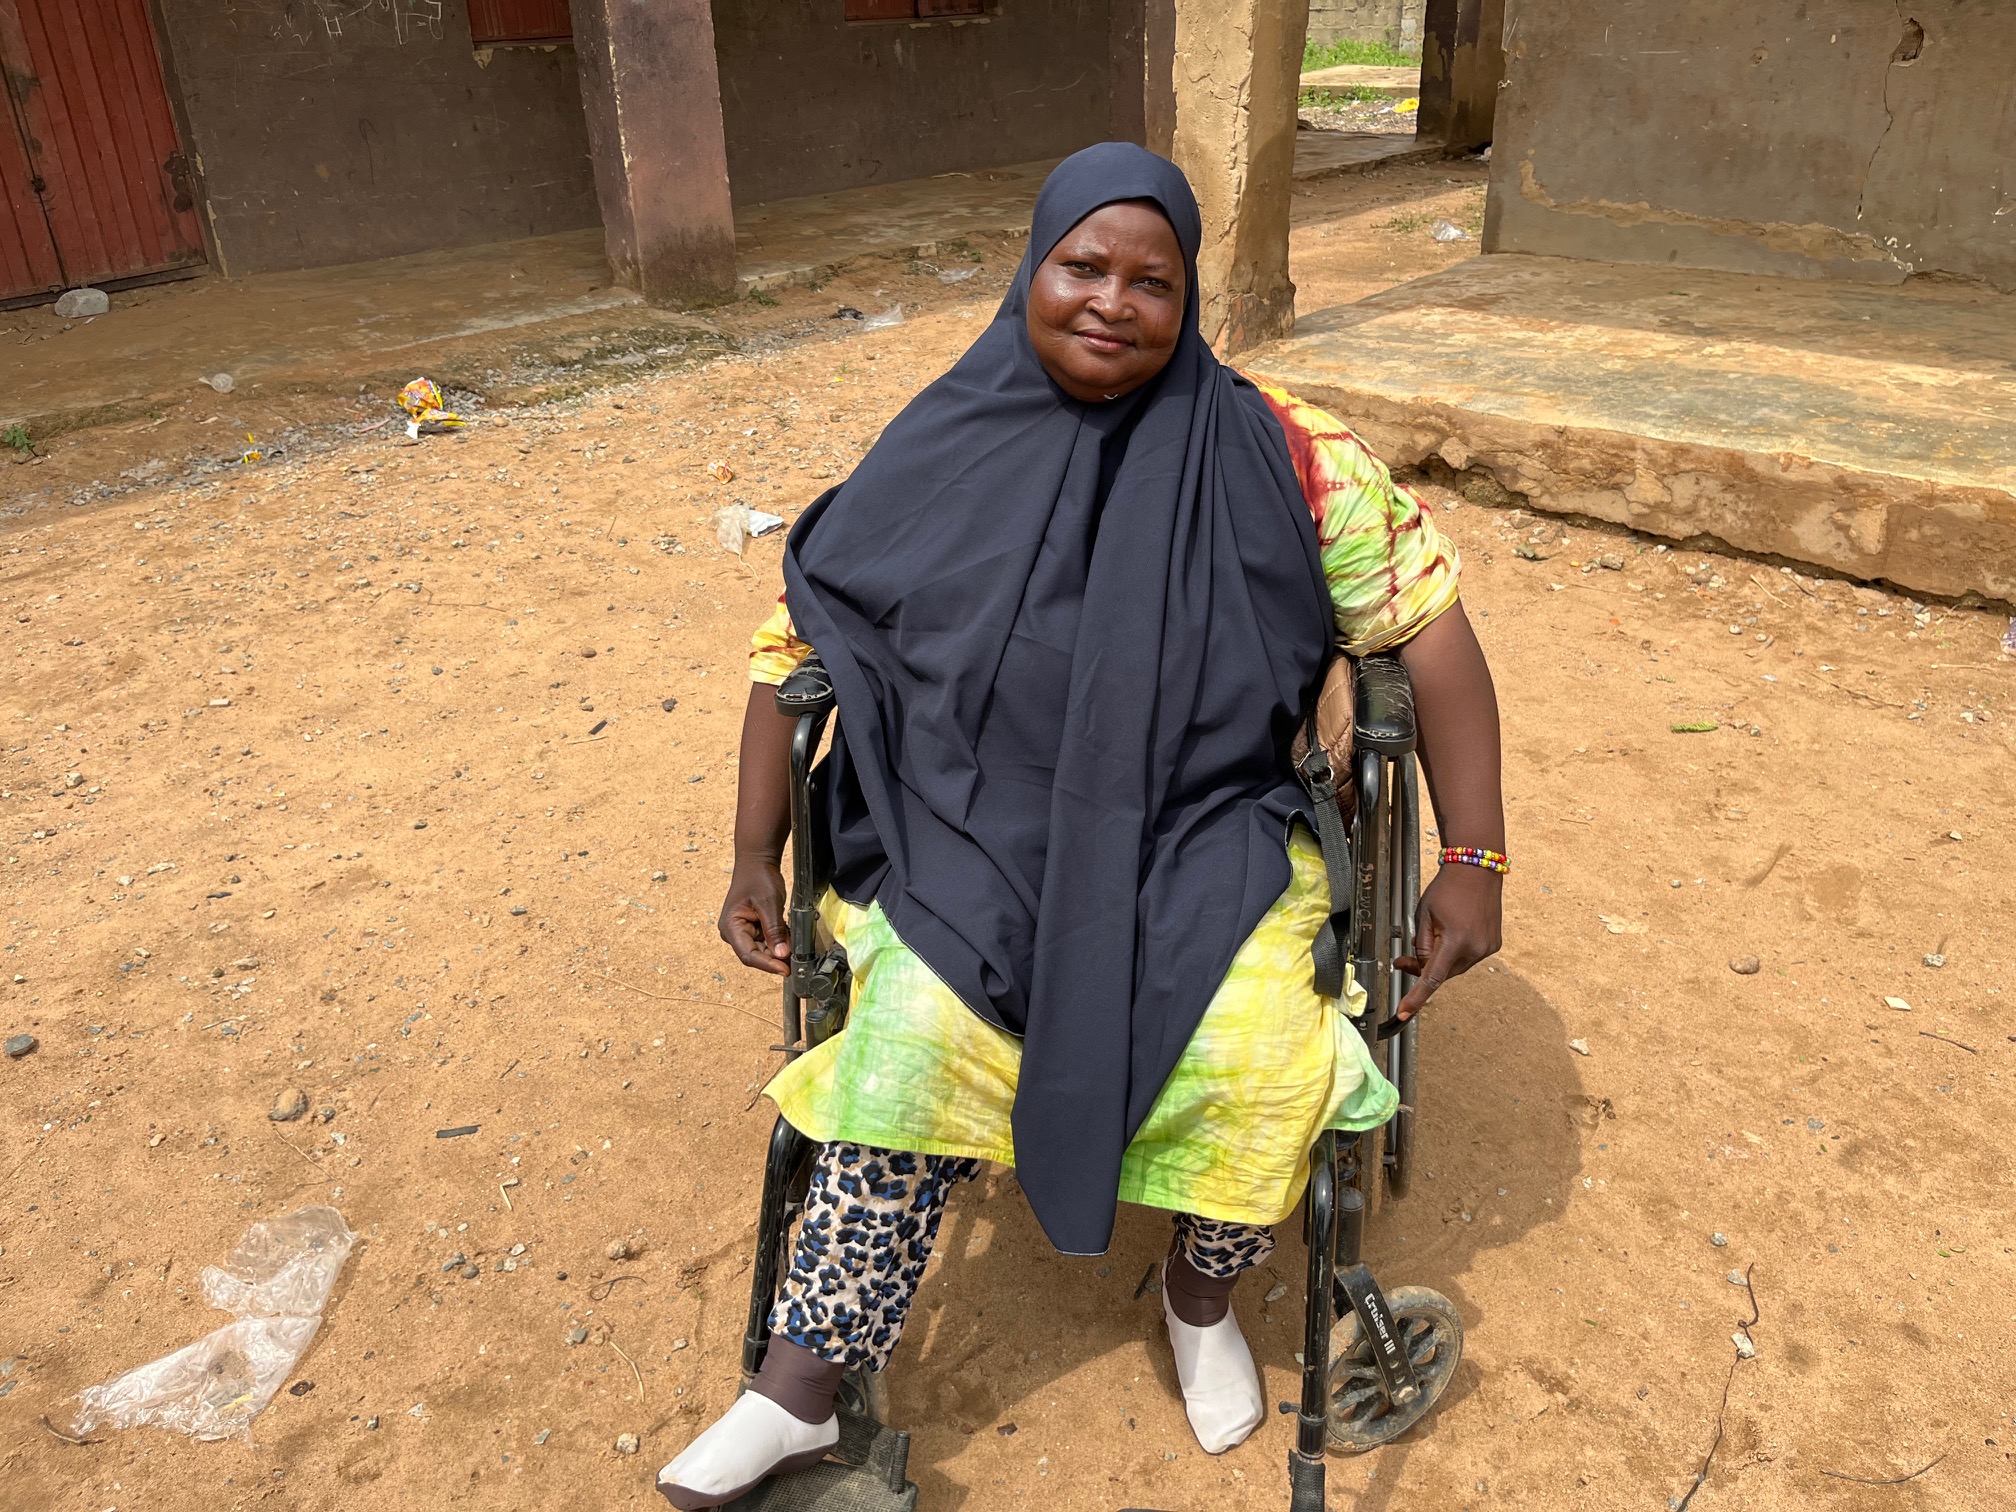 Rabiu Mustapha sits in her wheelchair. Photo credit: Claire Mom/TheCable